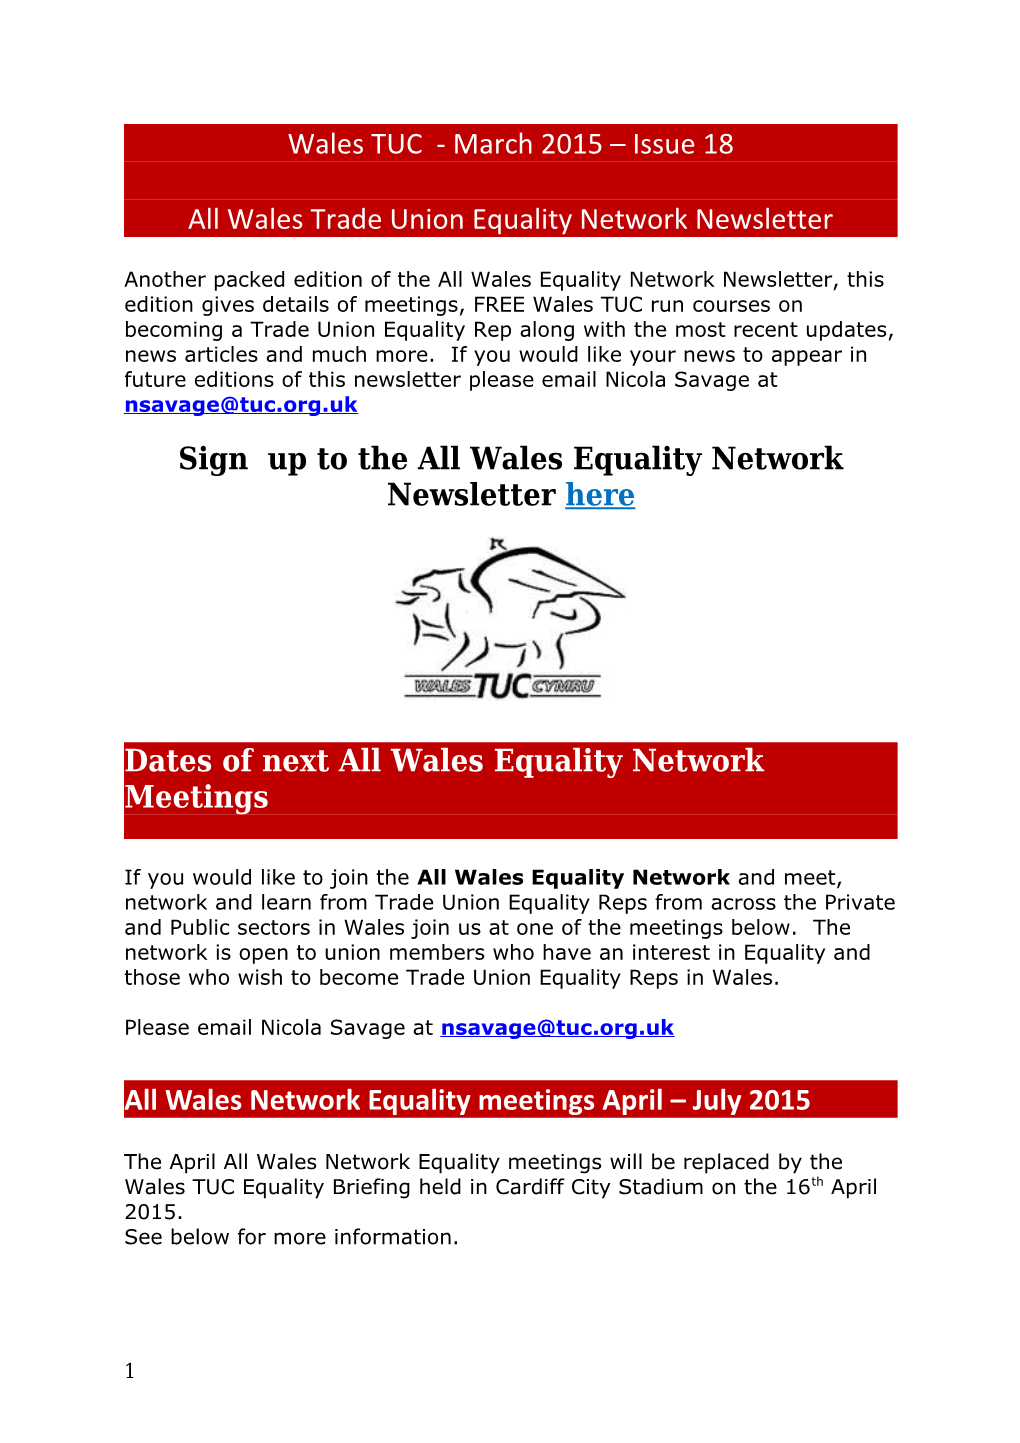 All Wales Trade Union Equality Network Newsletter